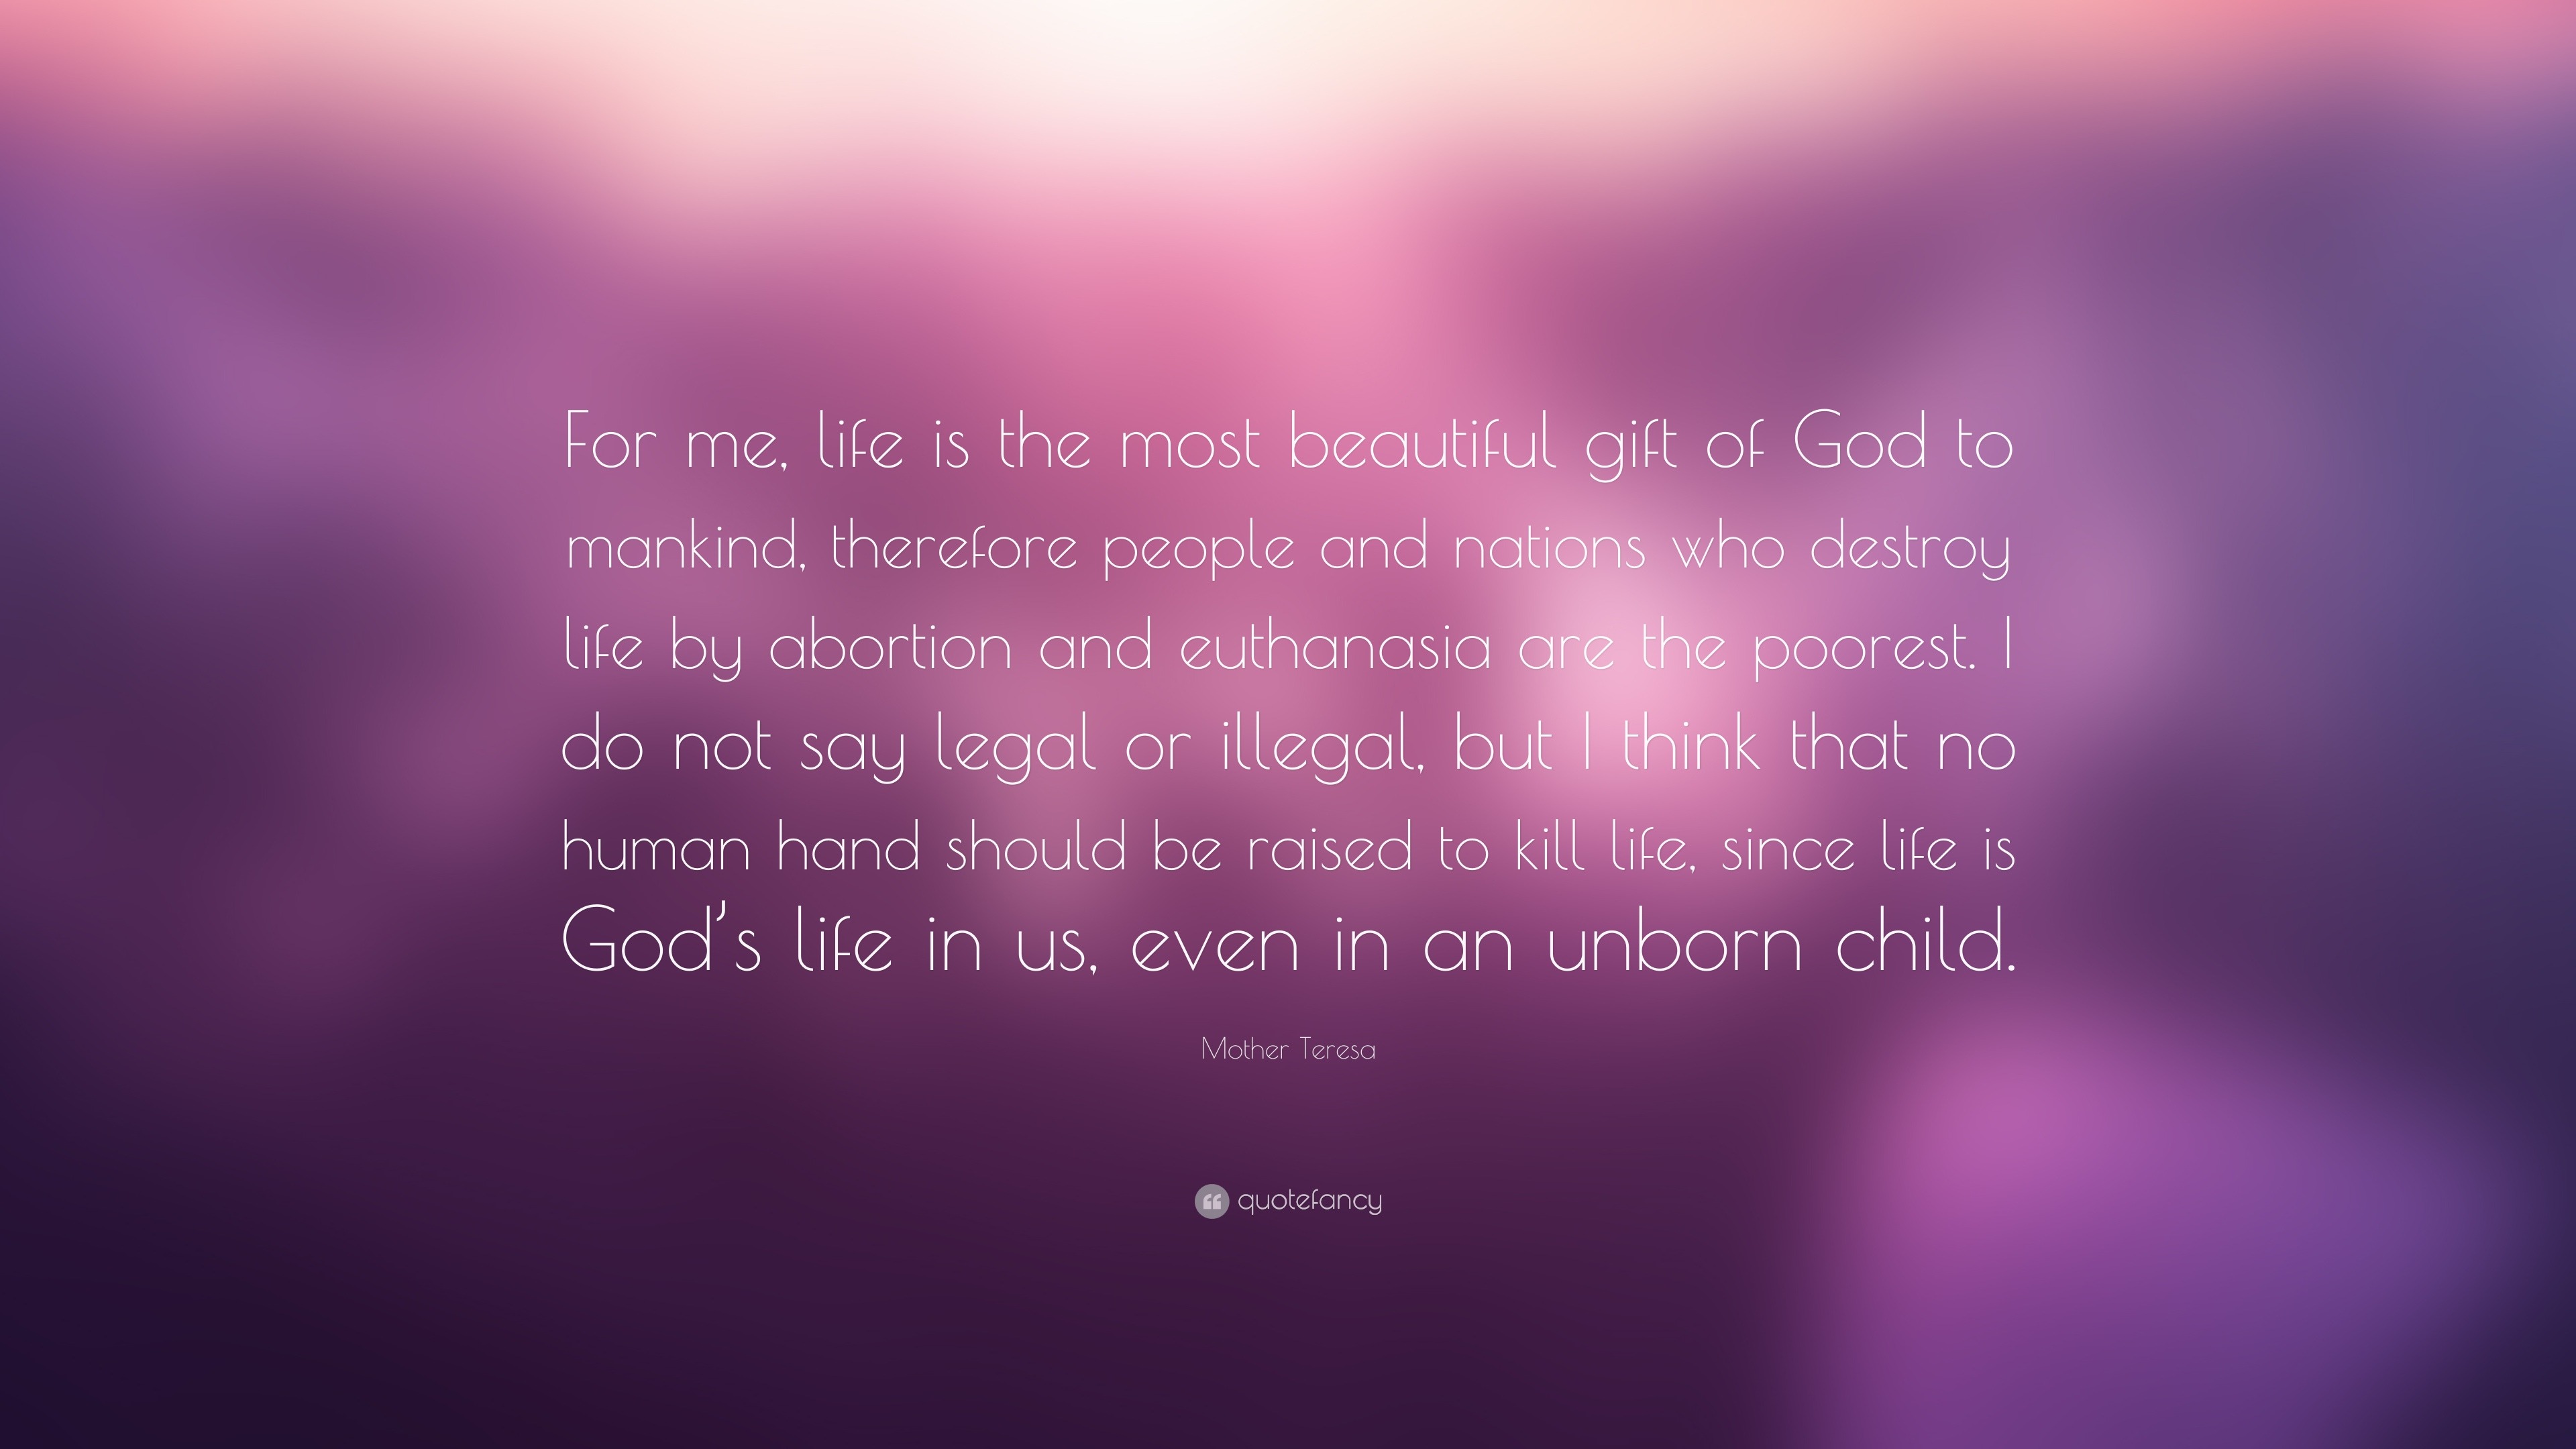 Mother Teresa Quote “For me life is the most beautiful t of God